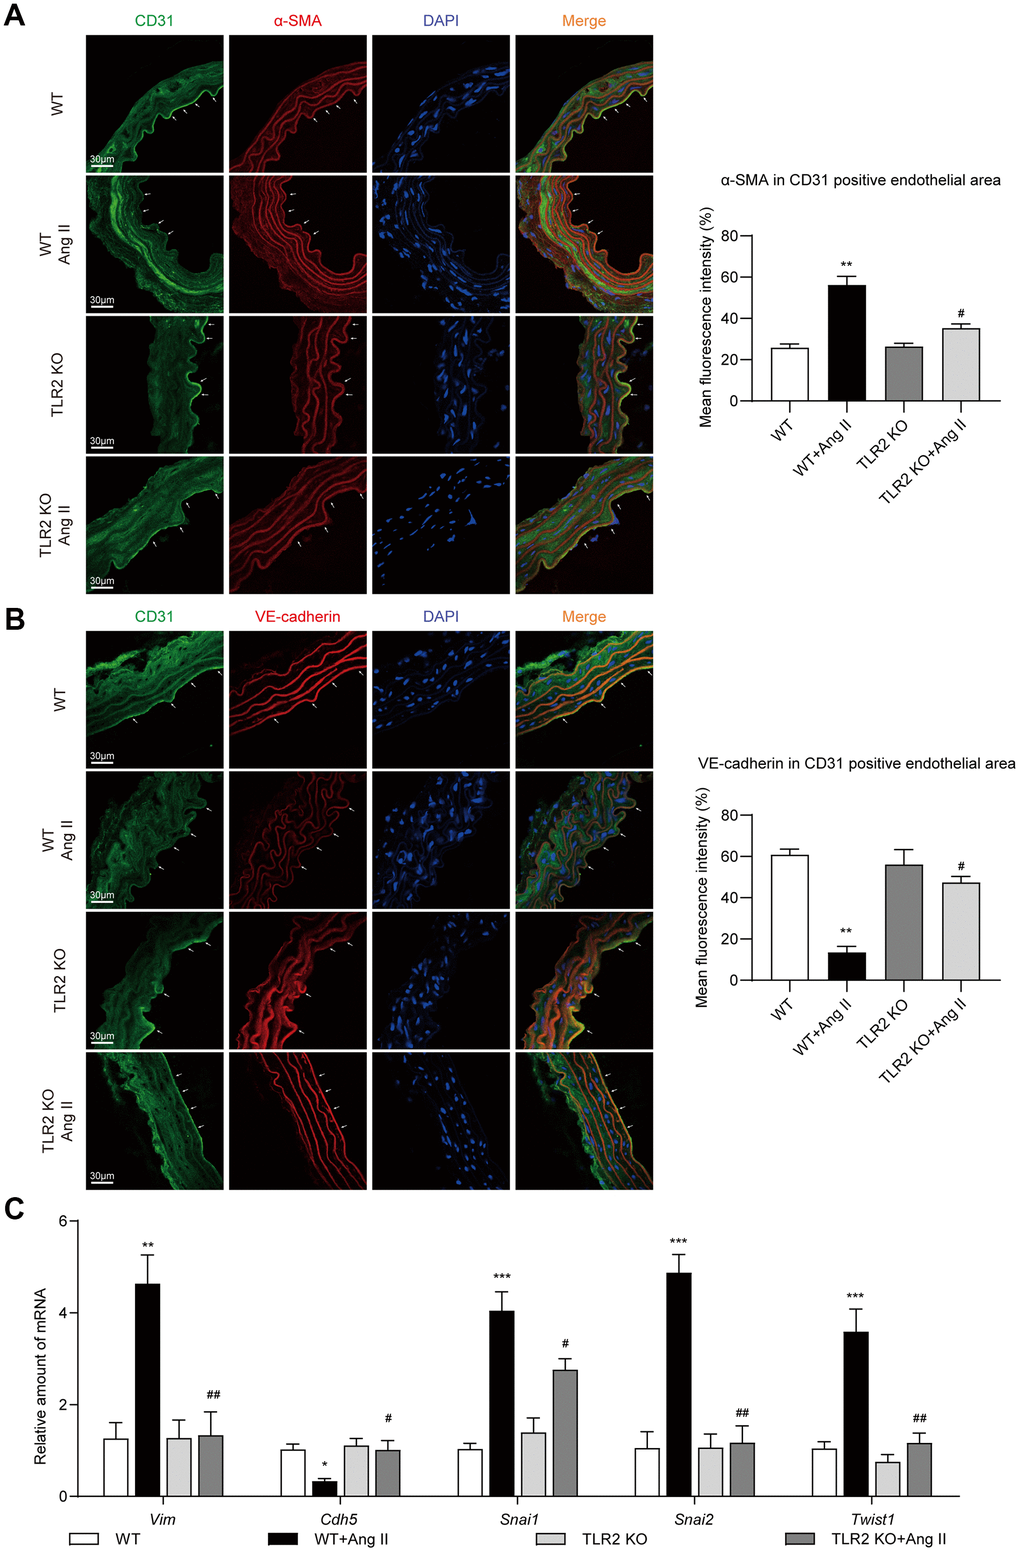 TLR2 KO mice are protected against Ang II-induced EndMT in aortas. (A) Representative immunofluorescence staining images showing CD31 (green) and α-SMA (red) in mouse aortic tissues. Arrows indicate positive staining. Tissues were counterstained with DAPI (blue) [scale bar = 30 μm]. Quantification of α-SMA fluorescence in CD31-positive endothelial area is shown on right. (B) Representative immunofluorescence staining images showing CD31 (green) and VE-cadherin (red) in mouse aortic tissues. Arrows indicate positive staining. Tissues were counterstained with DAPI (blue) [scale bar = 30 μm]. Quantification of VE-cadherin in CD31-positive endothelial area is shown on right. (C) mRNA levels of EndMT-associated genes in aortas [Data normalized to β-actin]. [n = 6-8; Data shown as Mean ± SEM; *p